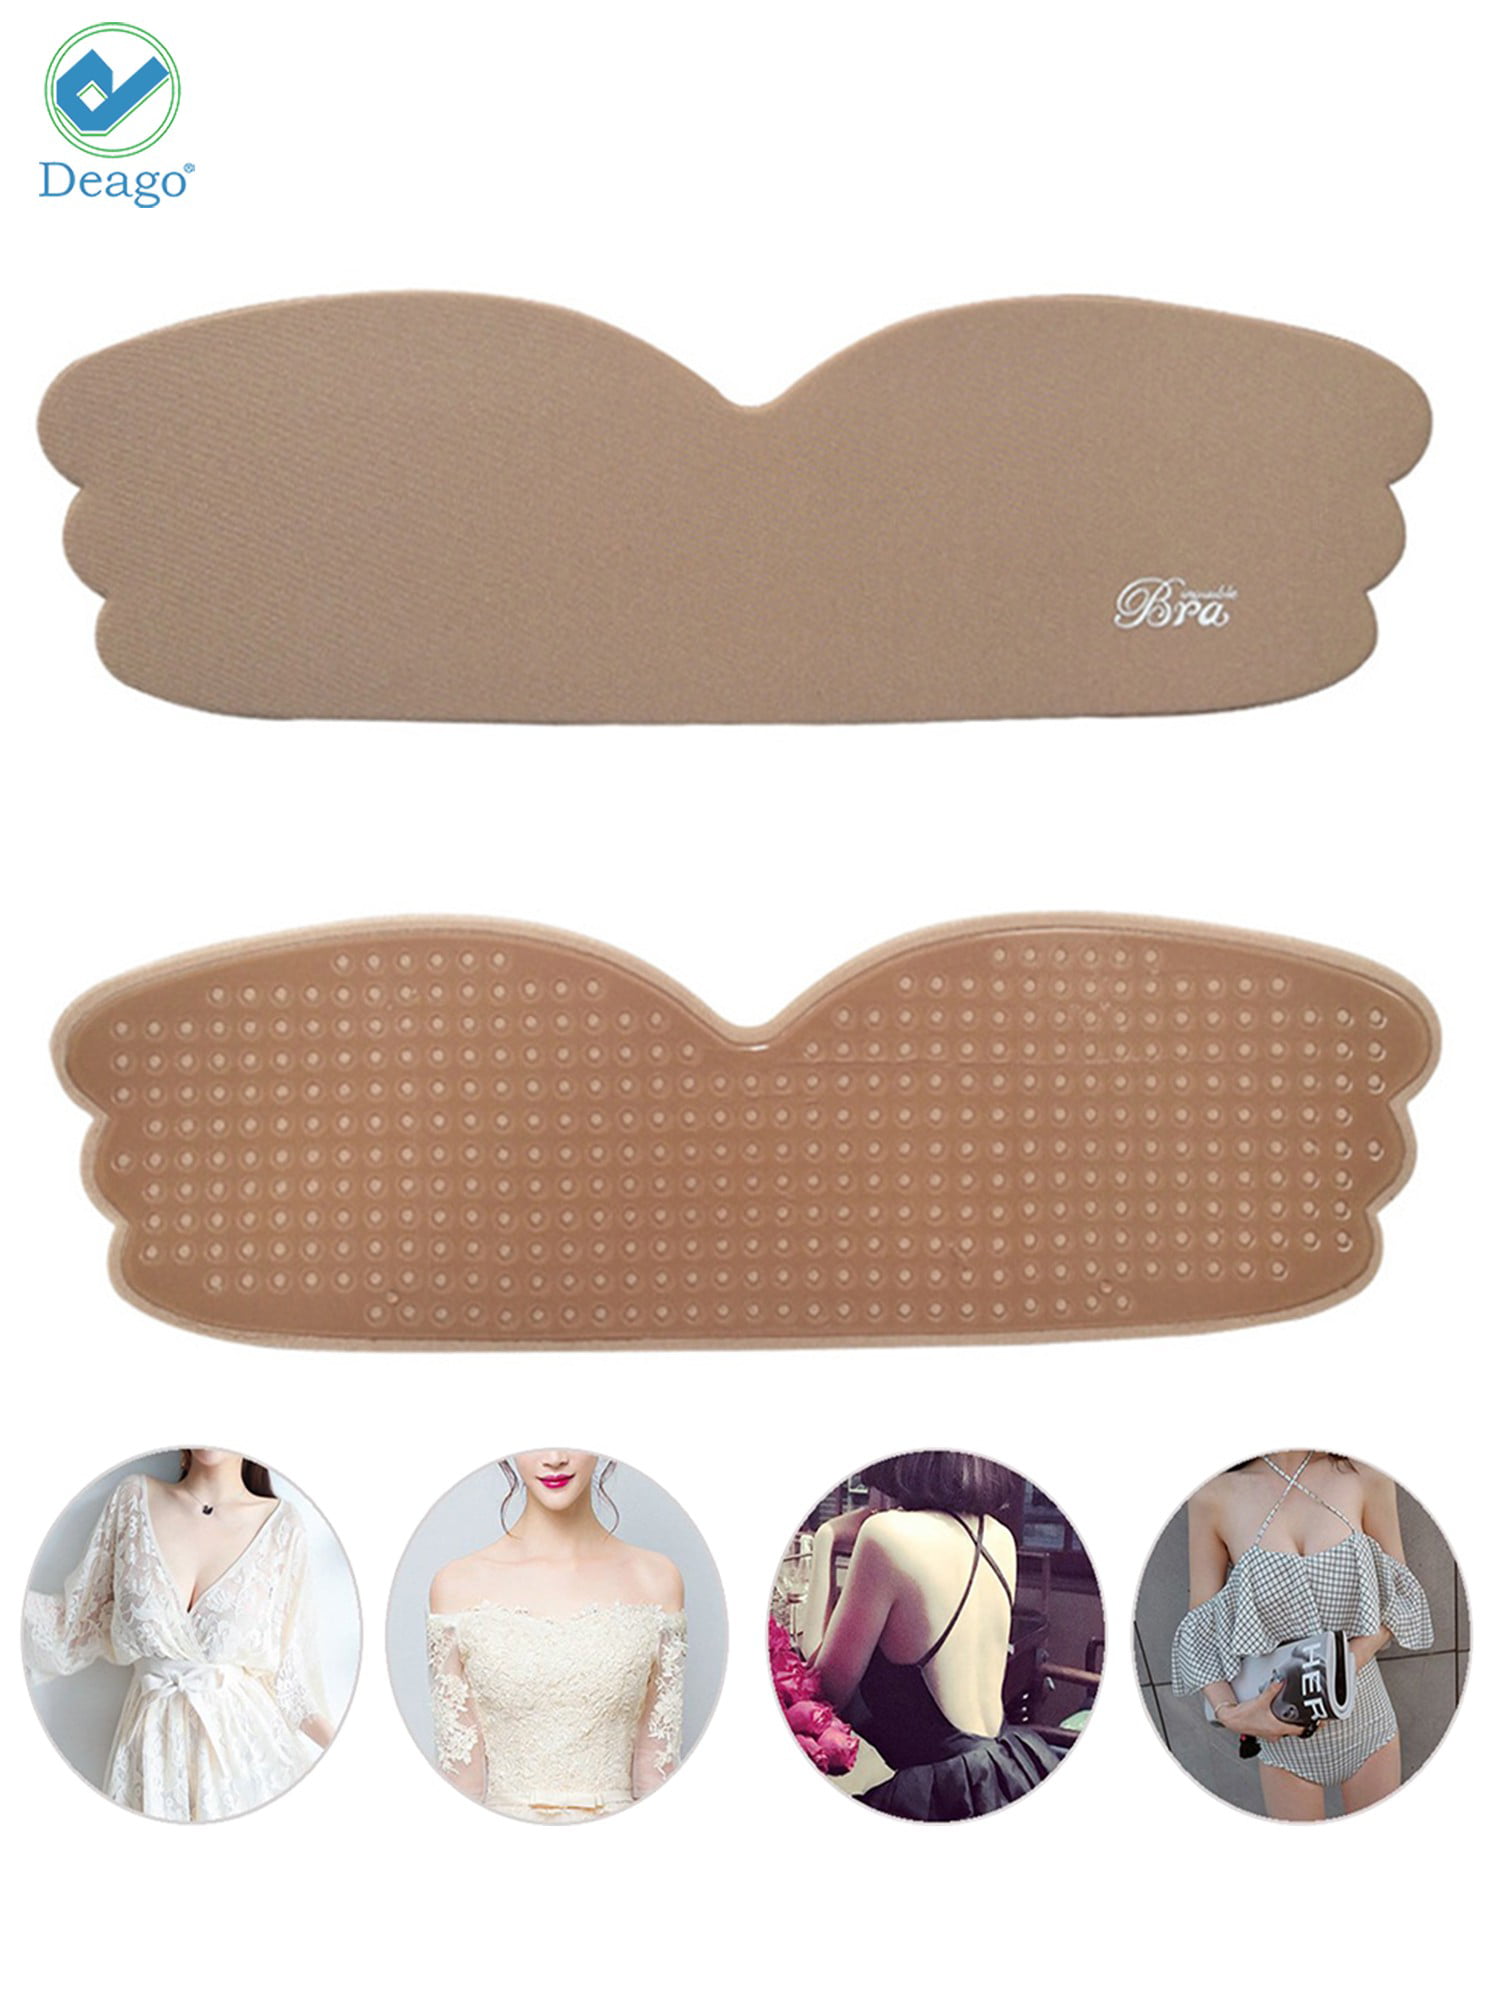 wybzd Silicone Self Adhesive Magic Push Up Strapless Invisible Bras Backless  Party Dress Accessories Beige S 